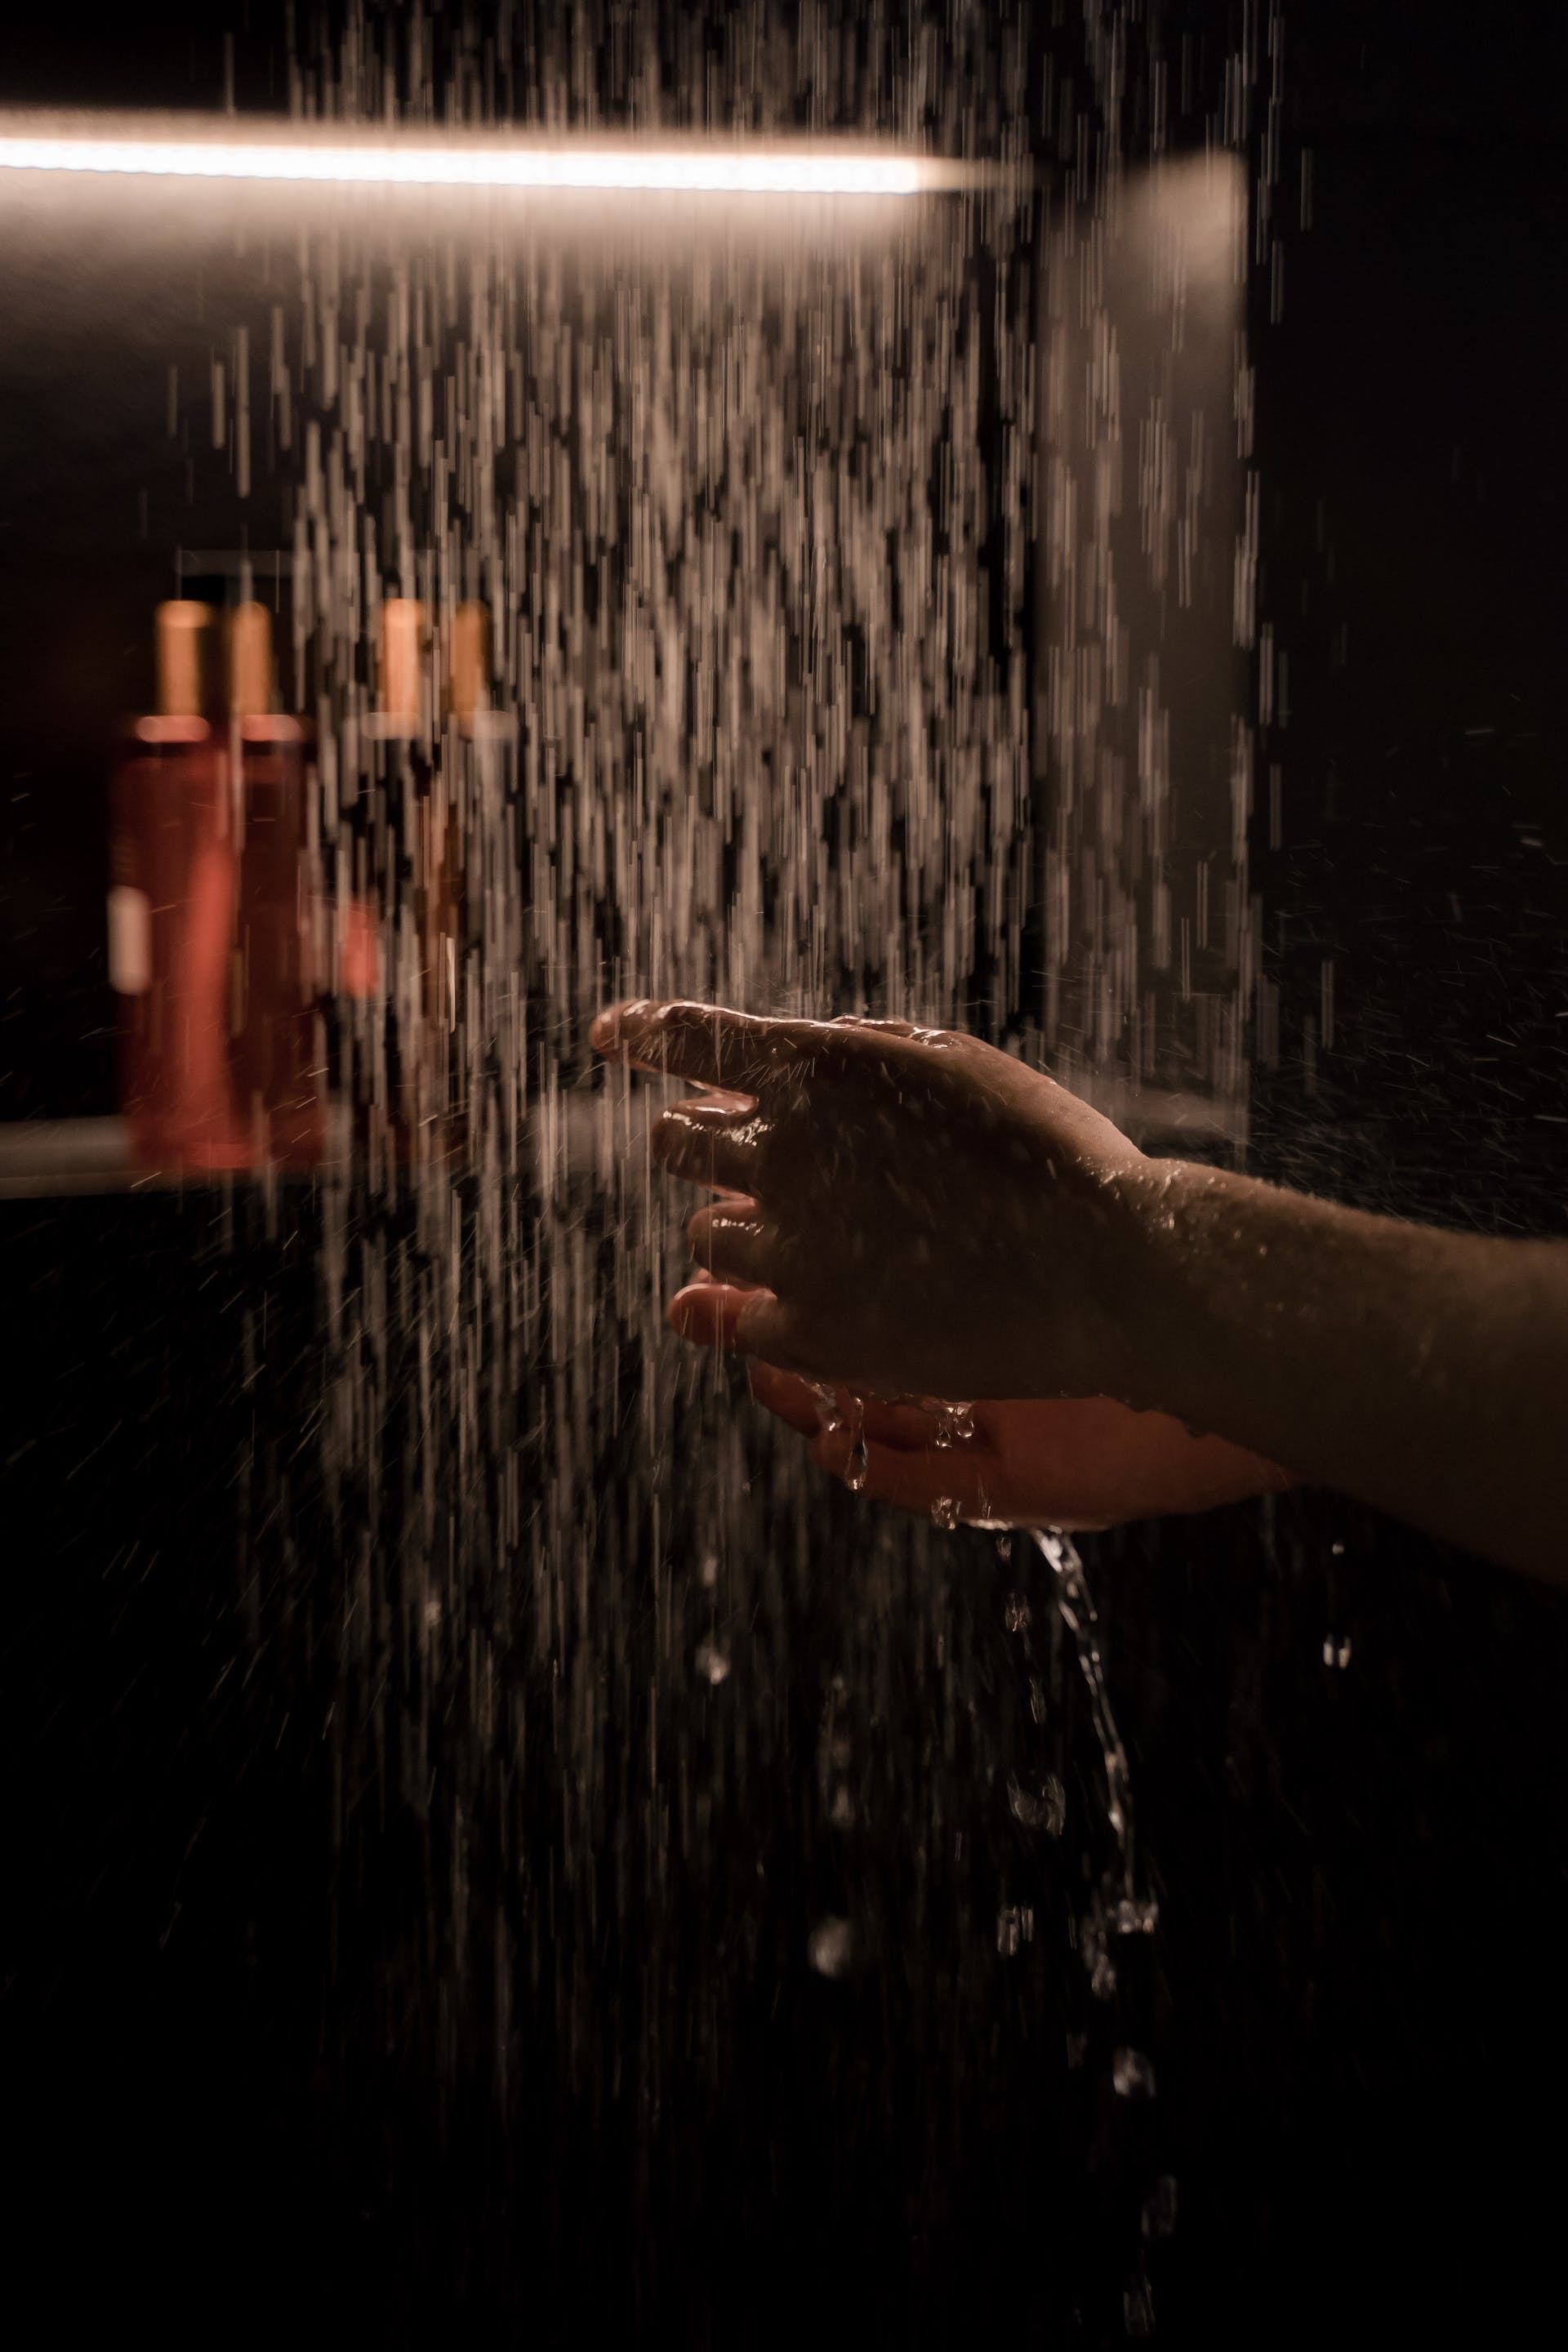 A person's hand under a shower | Source: Pexels